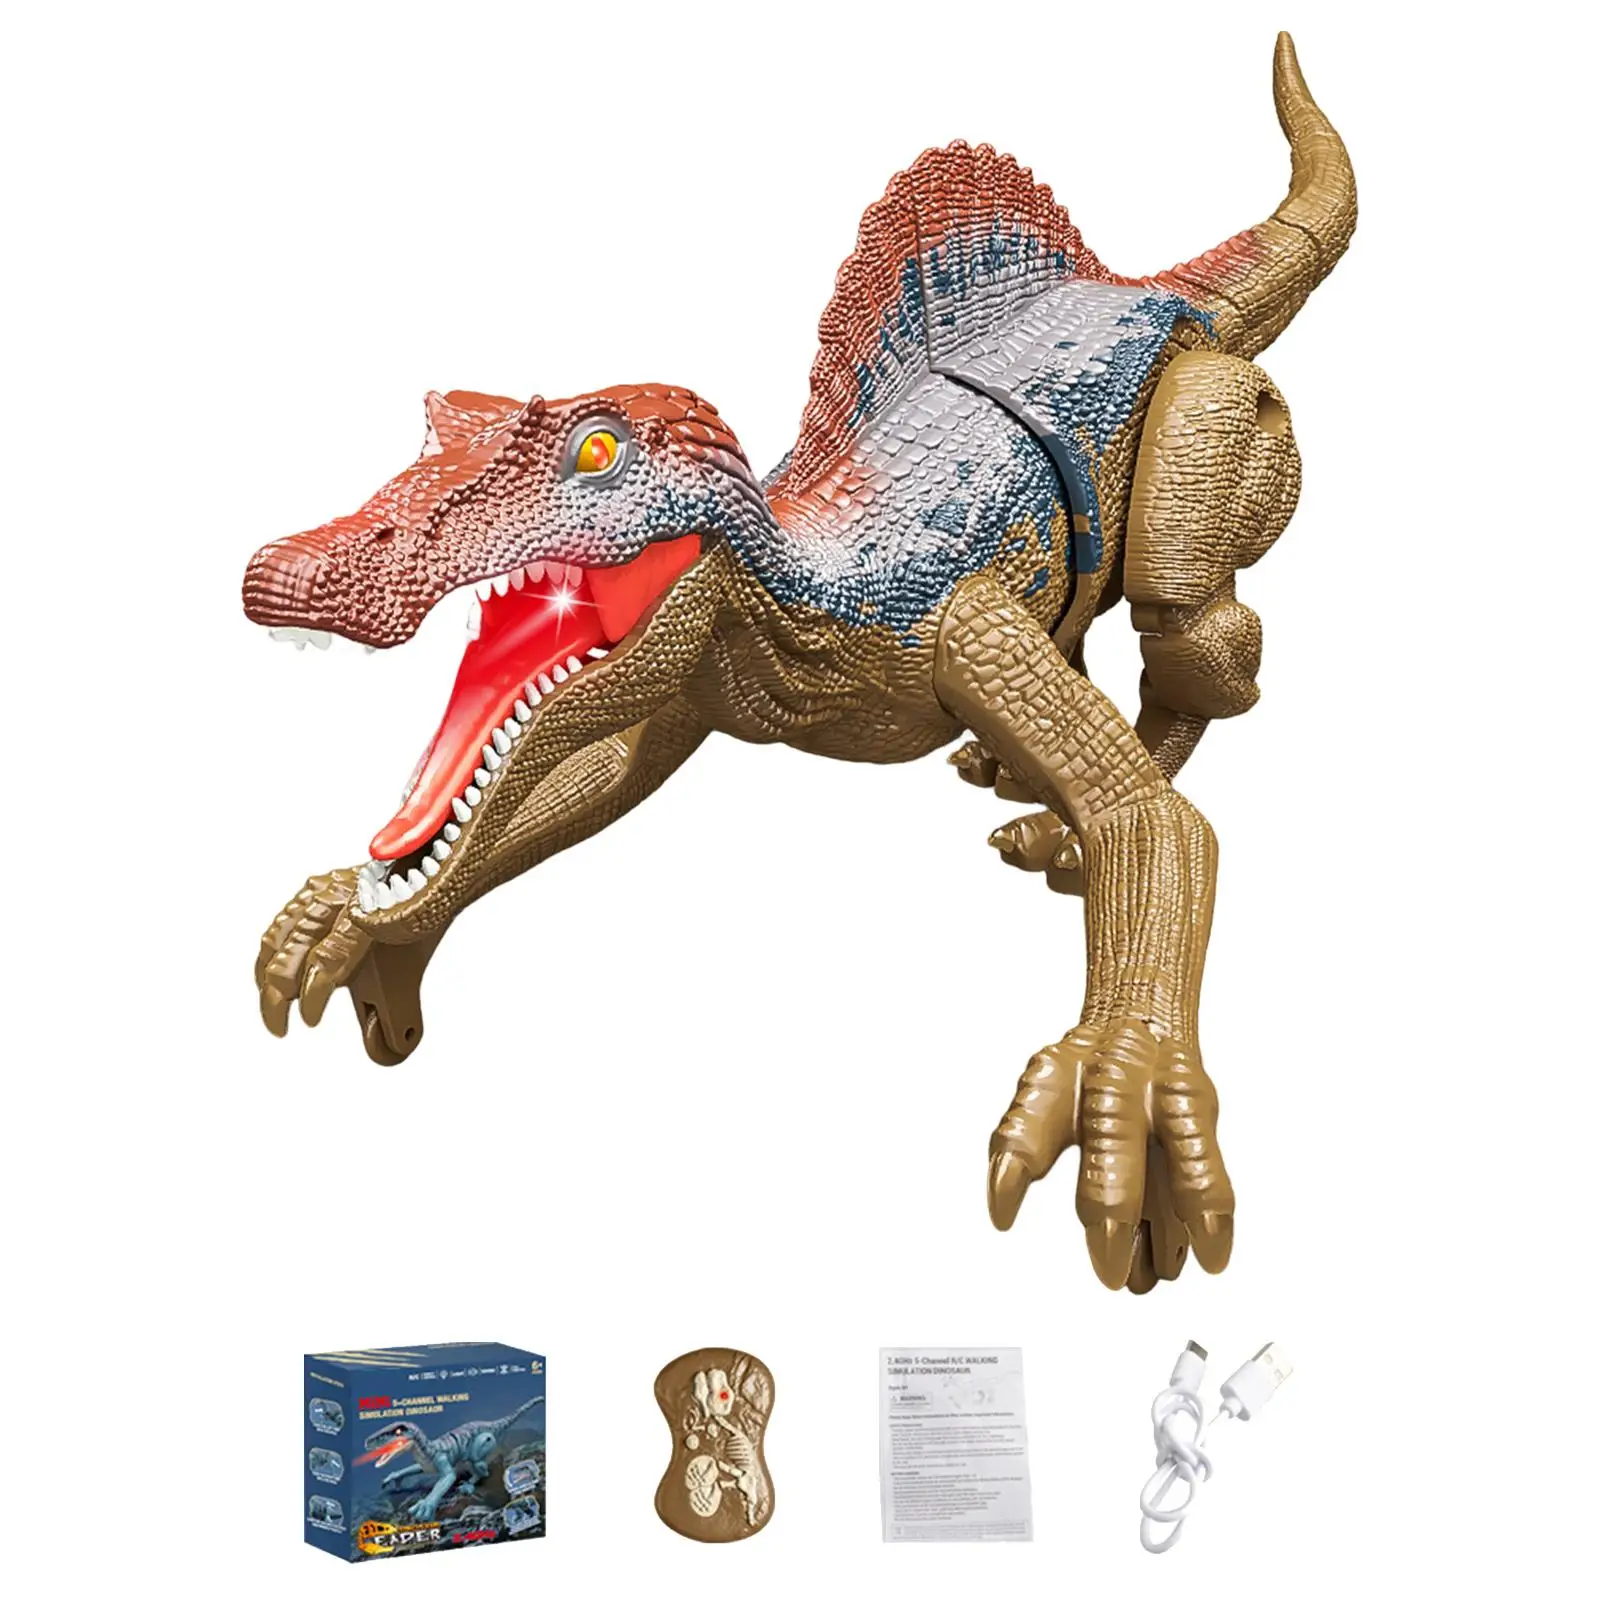 Robot Dinosaur with Sound and Light Realistic RC Dinosaur Toys Dinosaur Toy for Boys Girls Toddlers Children Holiday Gifts